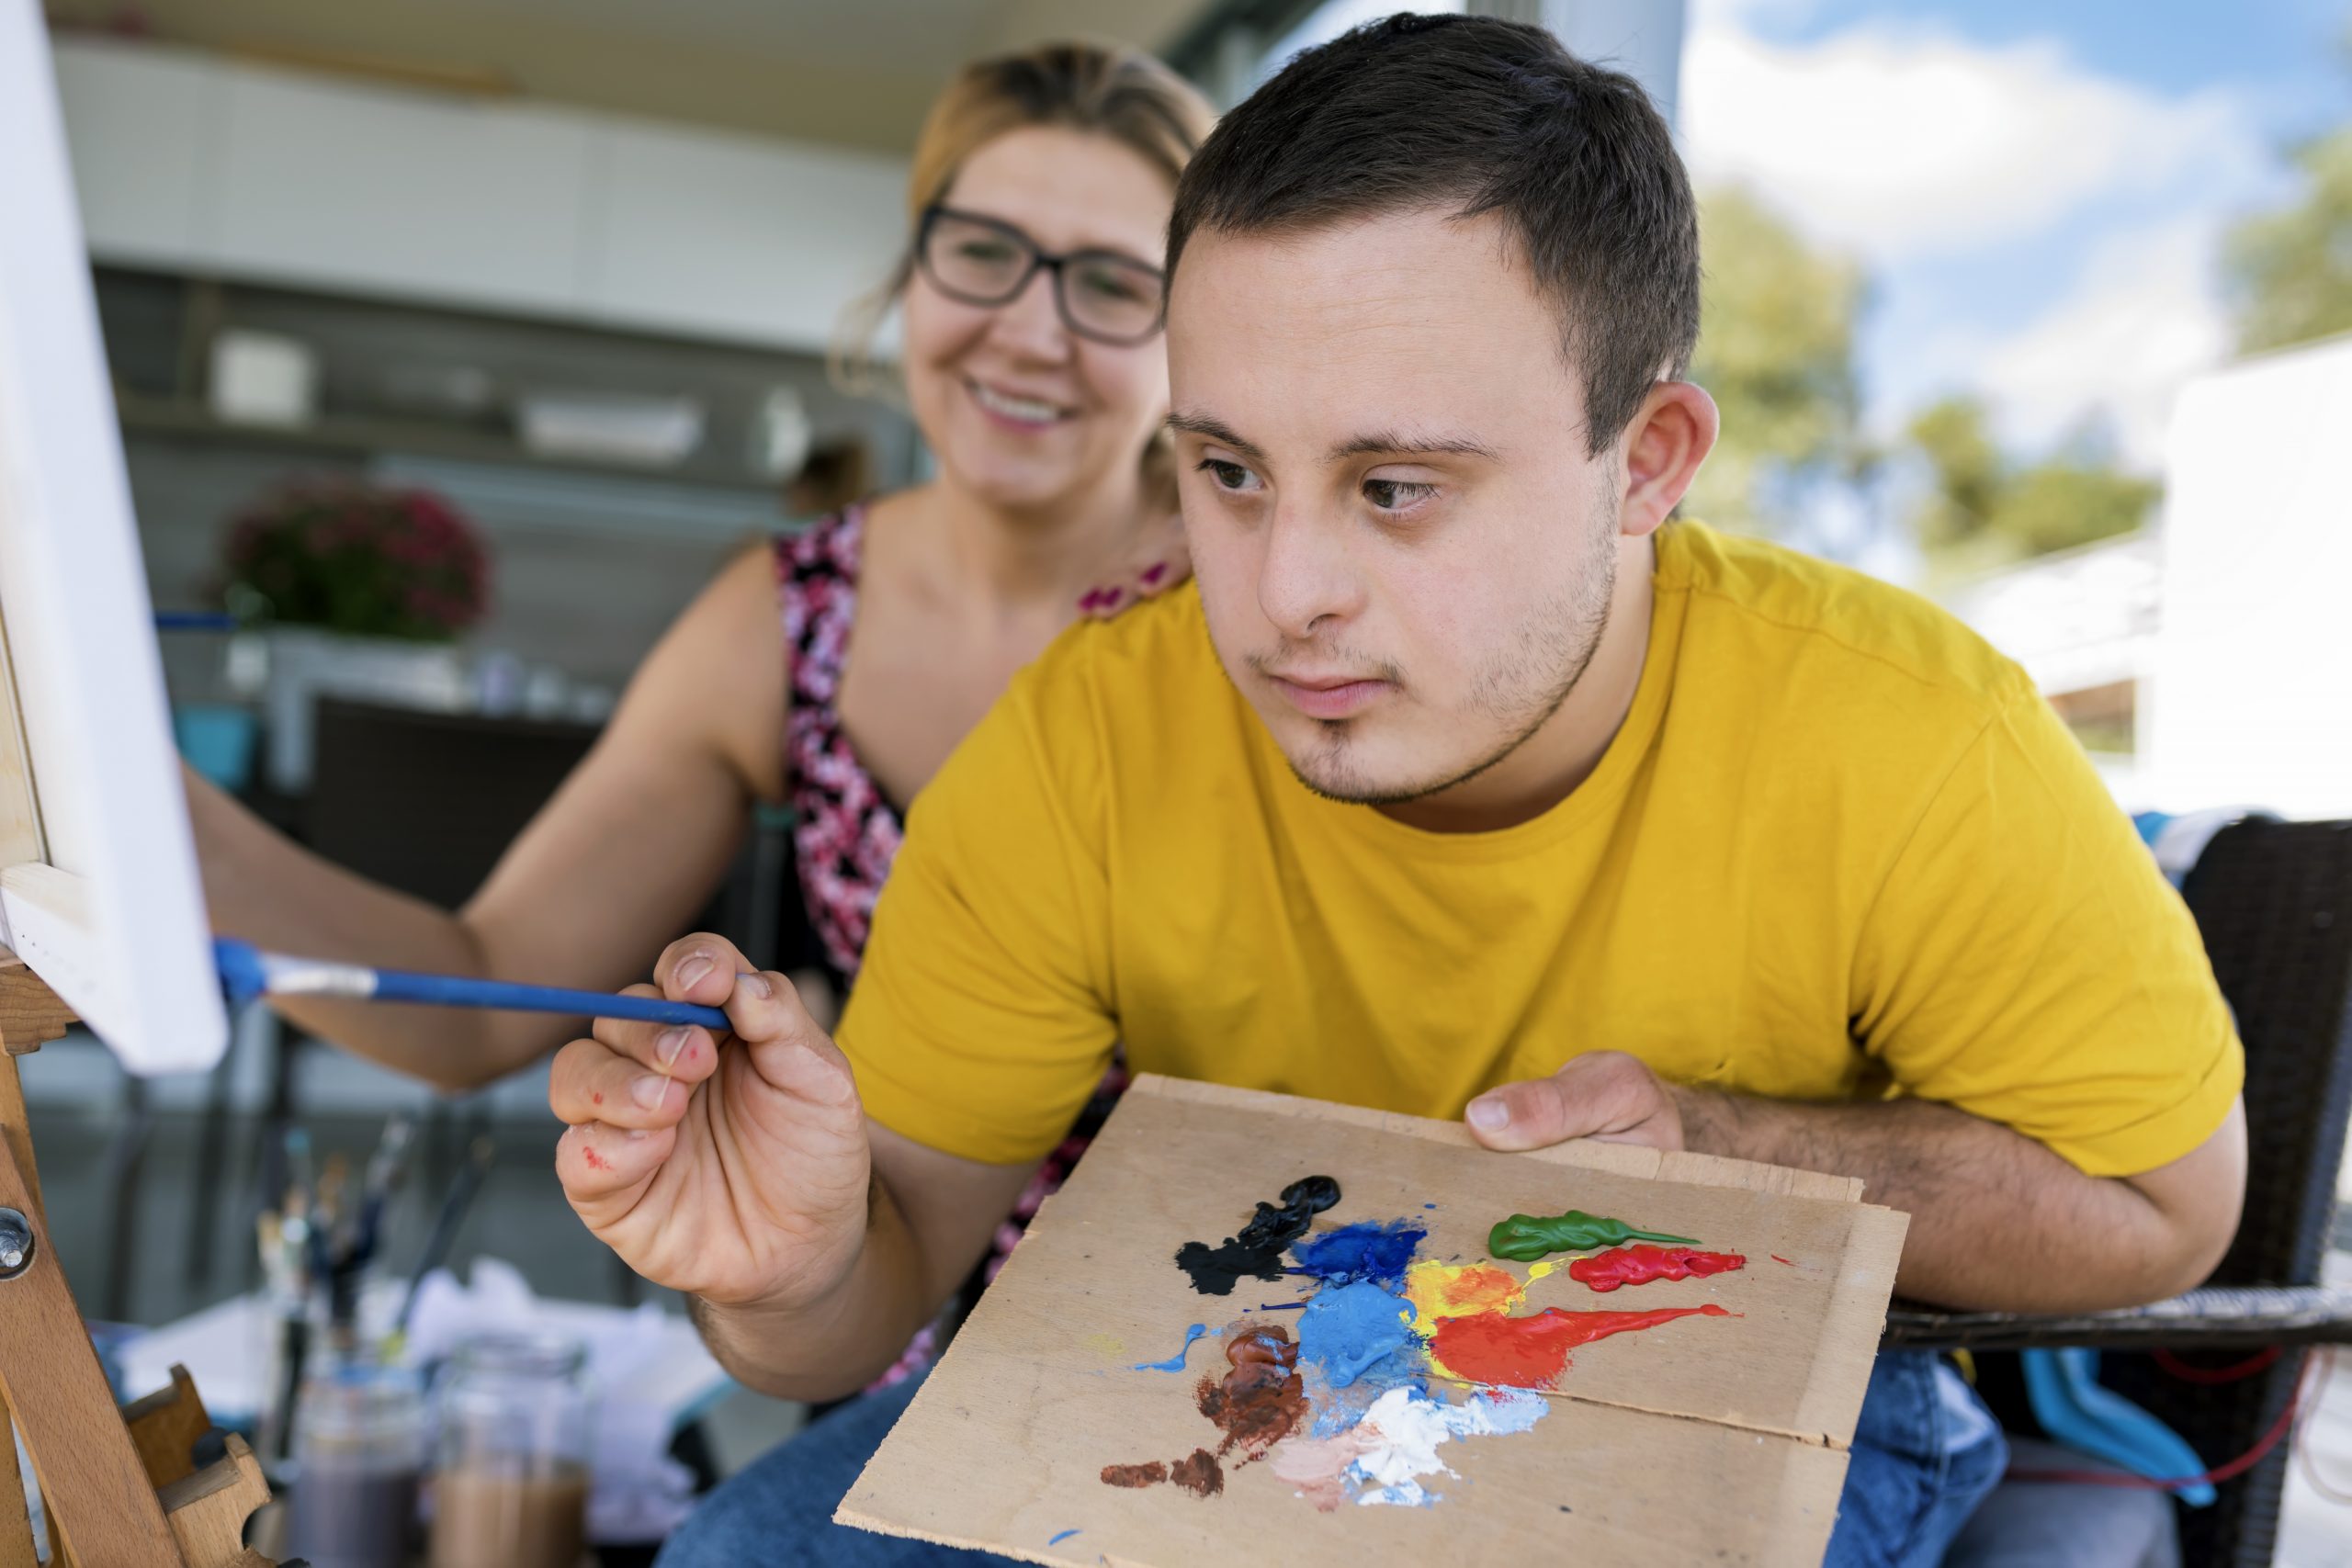 Teen boy with Down syndrome painting on canvas with his tutor    on terrace above riverbank